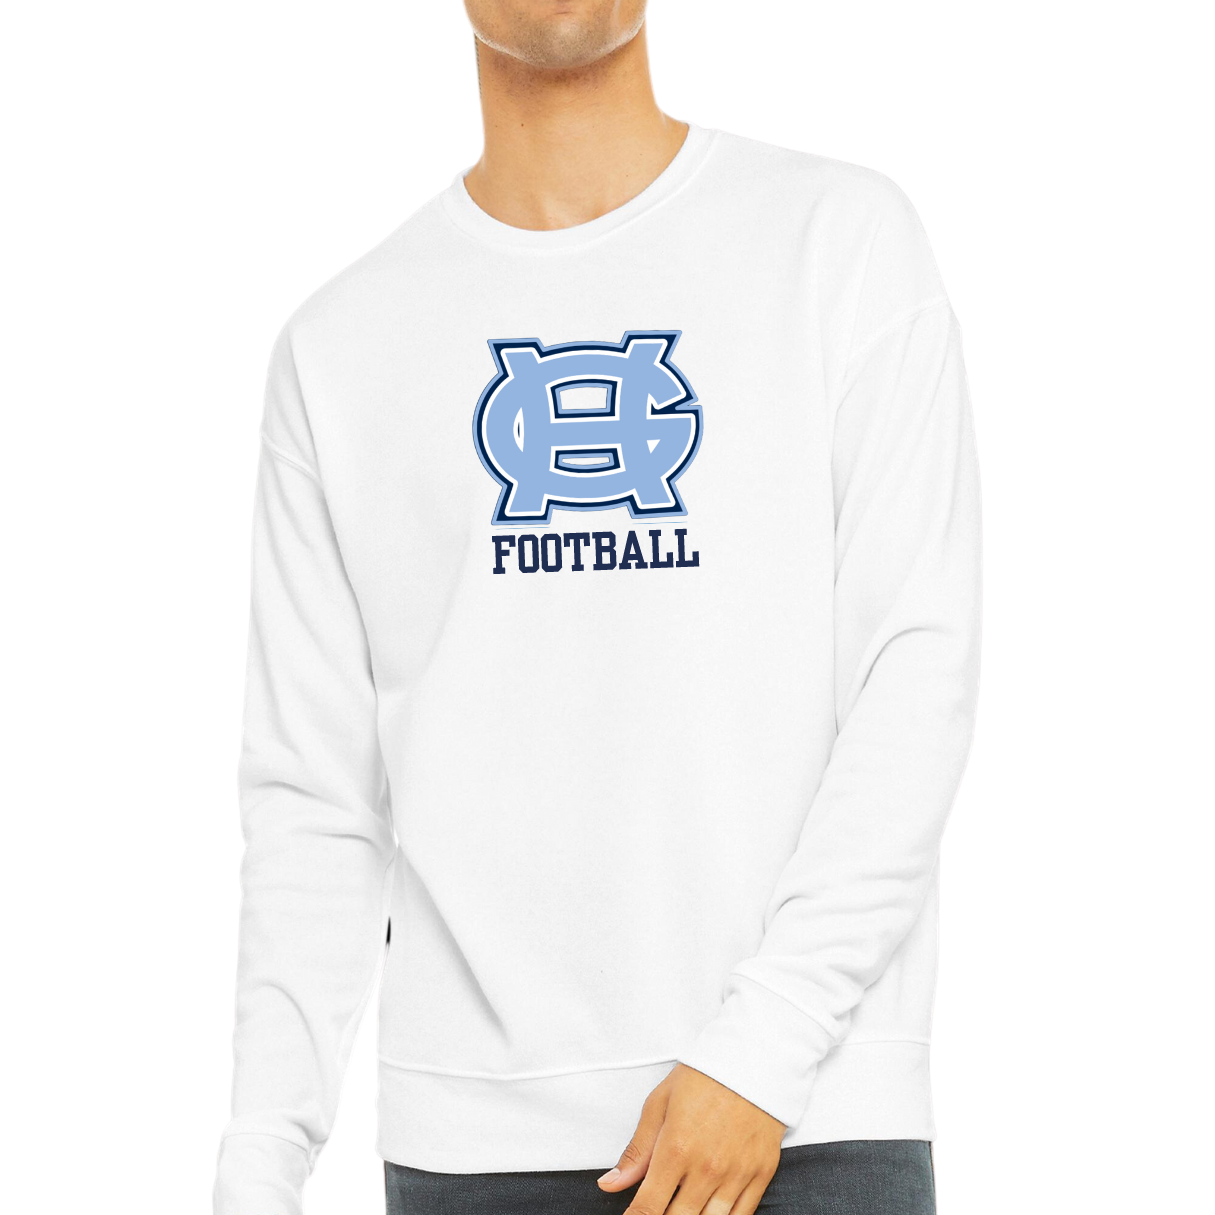 Classic GH Football Crewneck - Adult and Youth